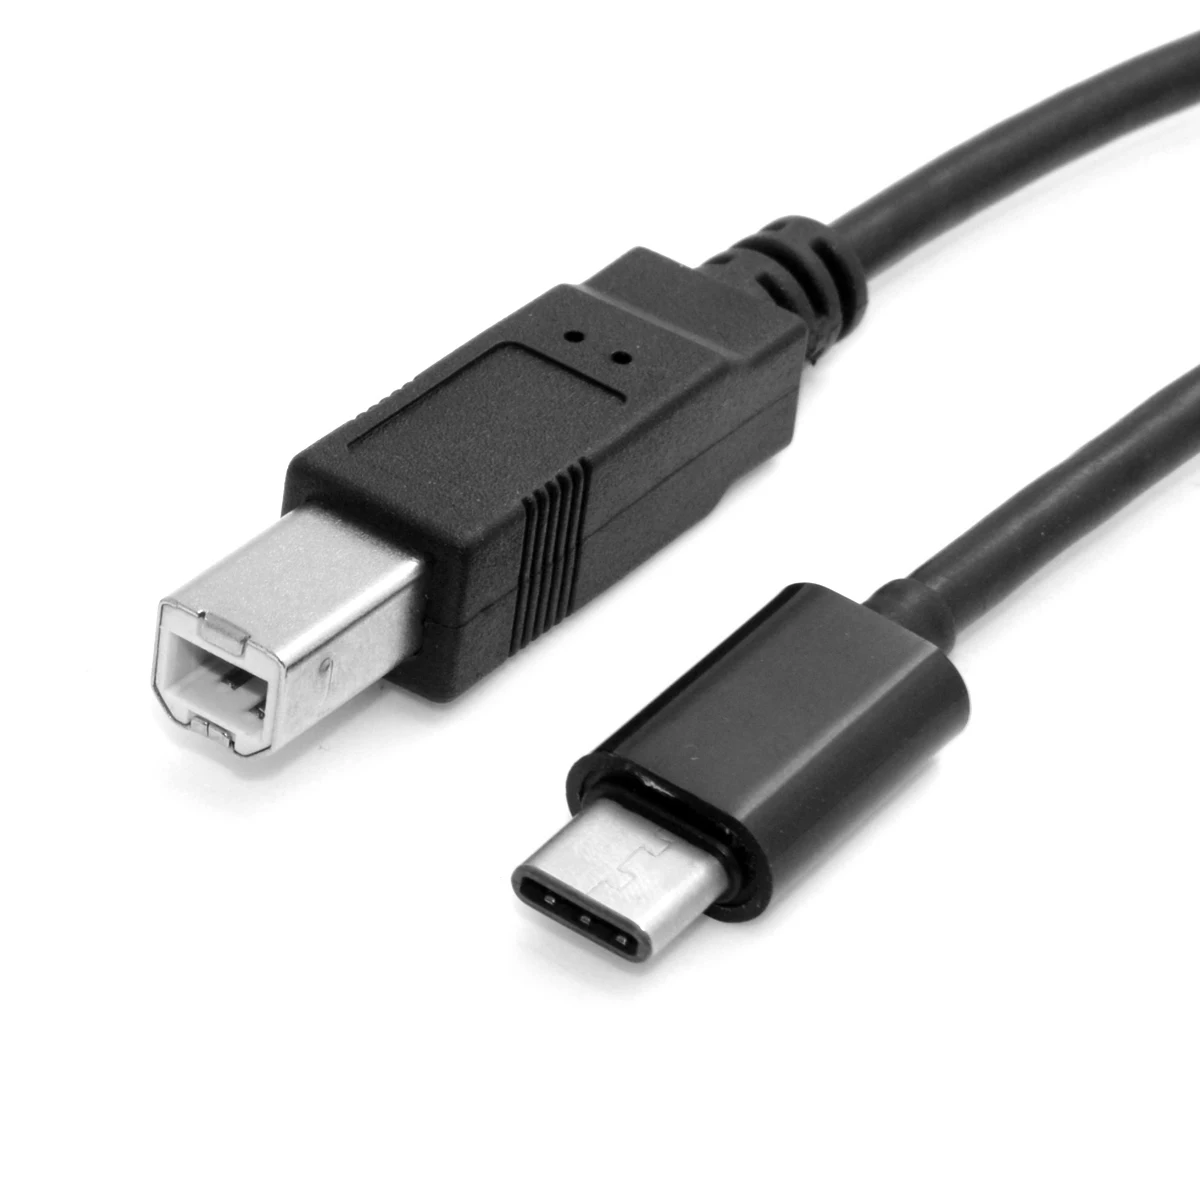 Chenyang-Cable-CY-USB-C-USB-3-1-Type-C-Male-Connector-to-USB-2-0.jpg